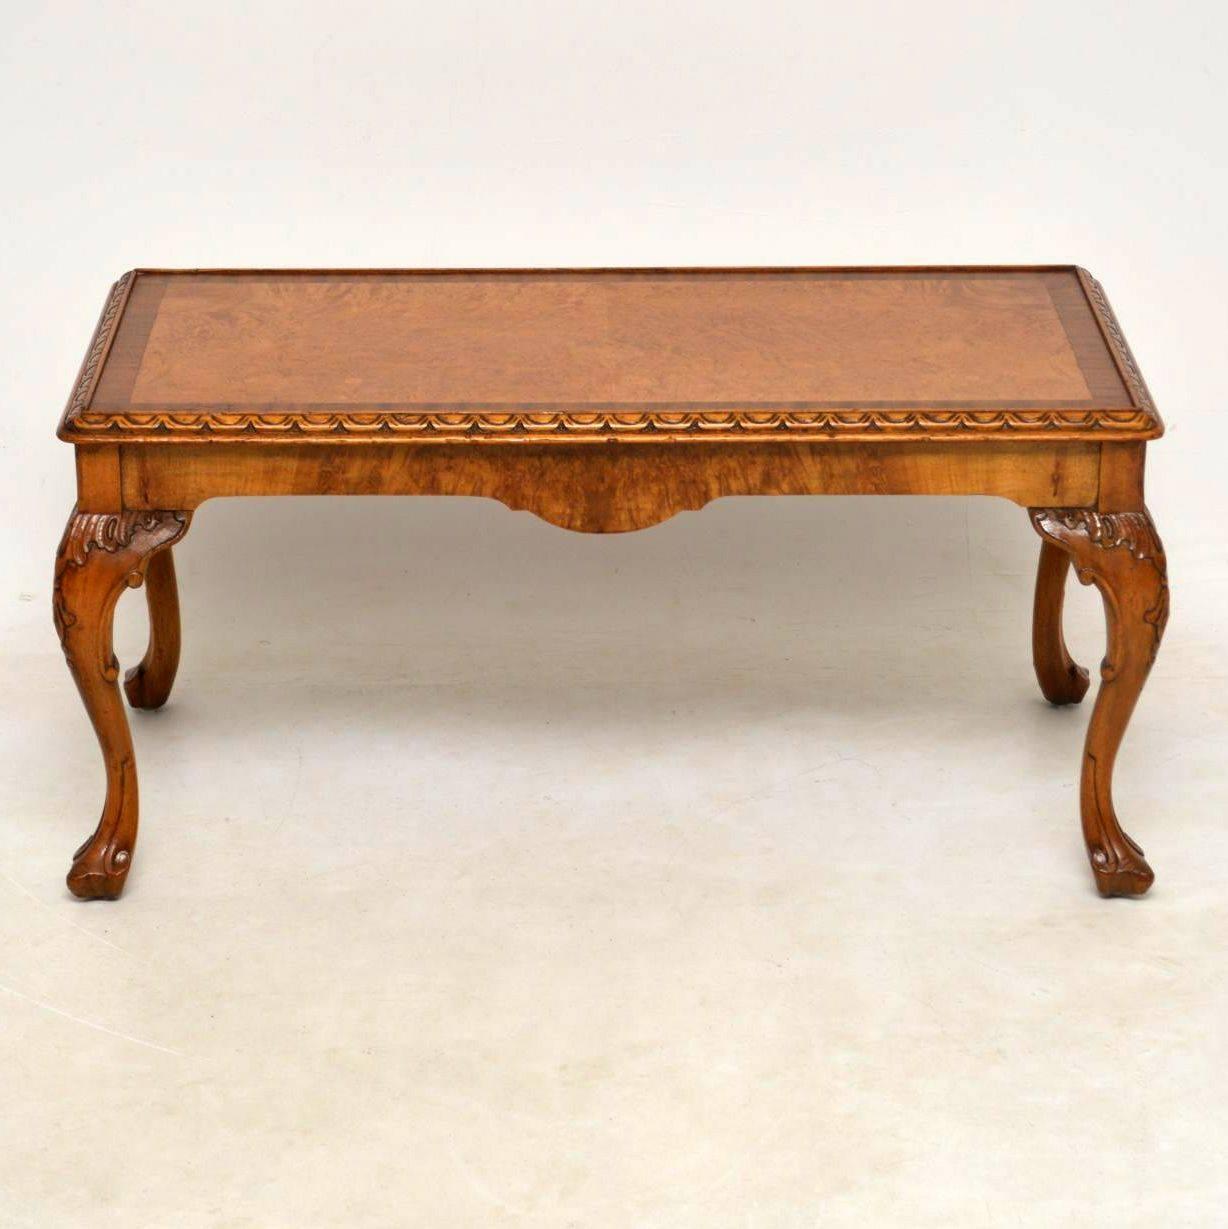 Antique walnut coffee table in excellent condition dating from around the 1920s period. It’s very good quality and has some nice details. The top looks like burr maple, with a cross banded edge of walnut. It’s carved around the top edge and has